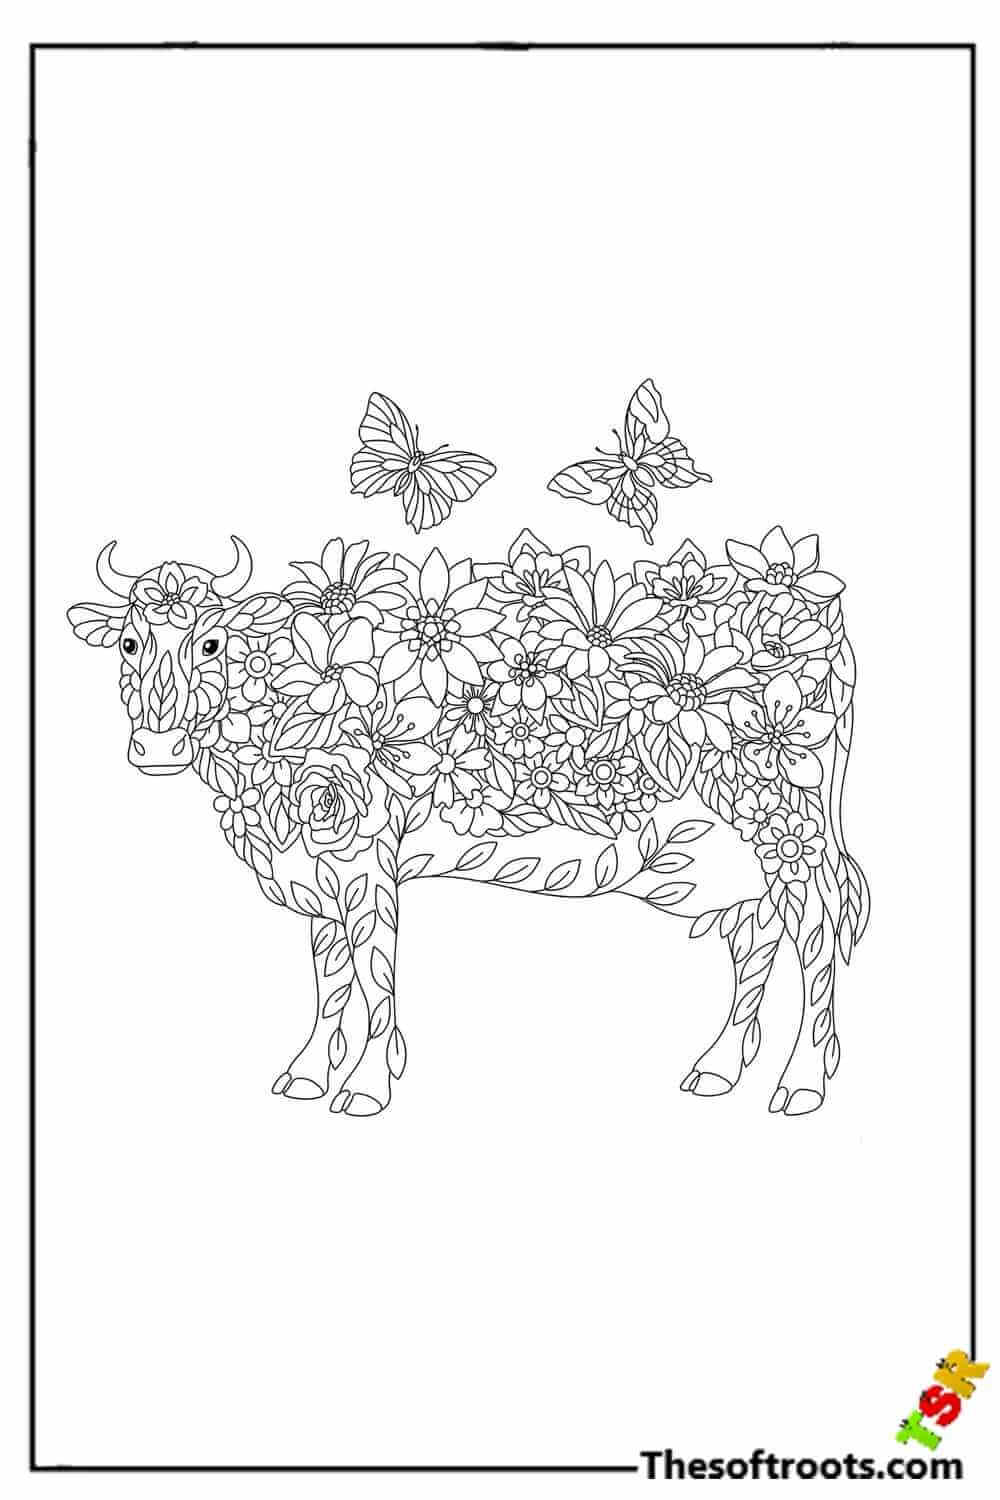 Adult Cow coloring pages